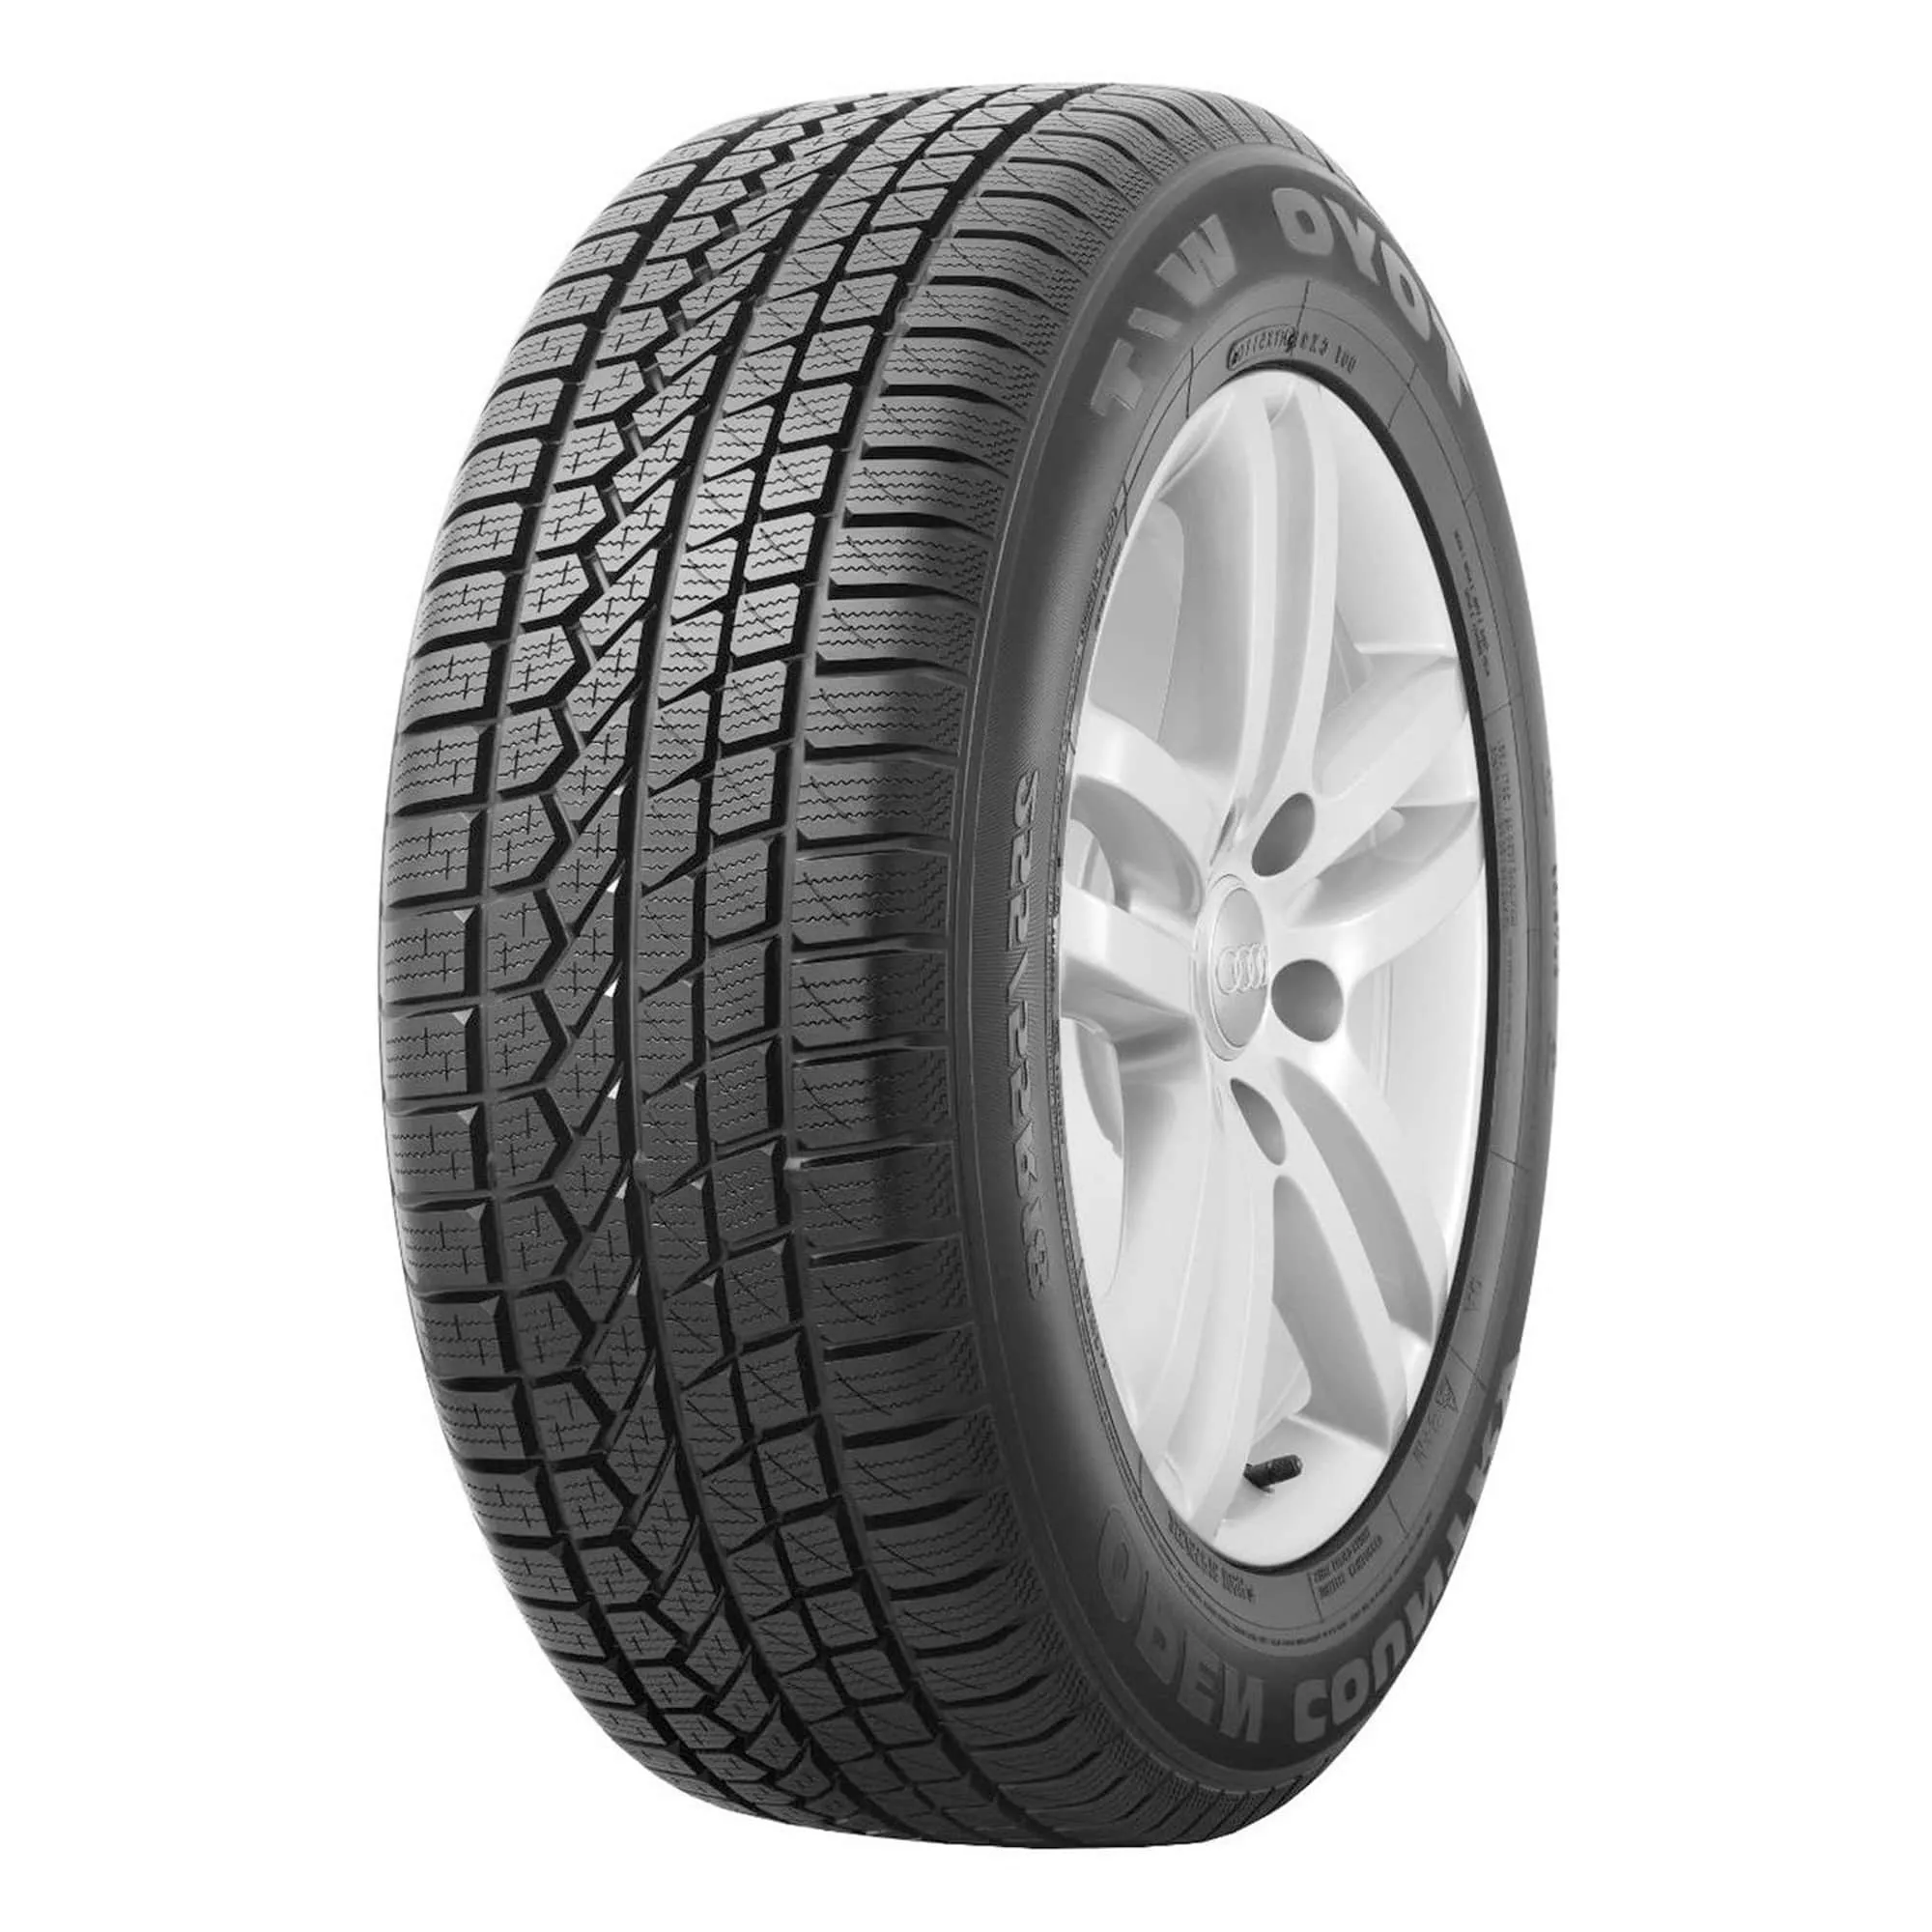 Шина 295/40R20 110V OPEN COUNTRY W/T XL